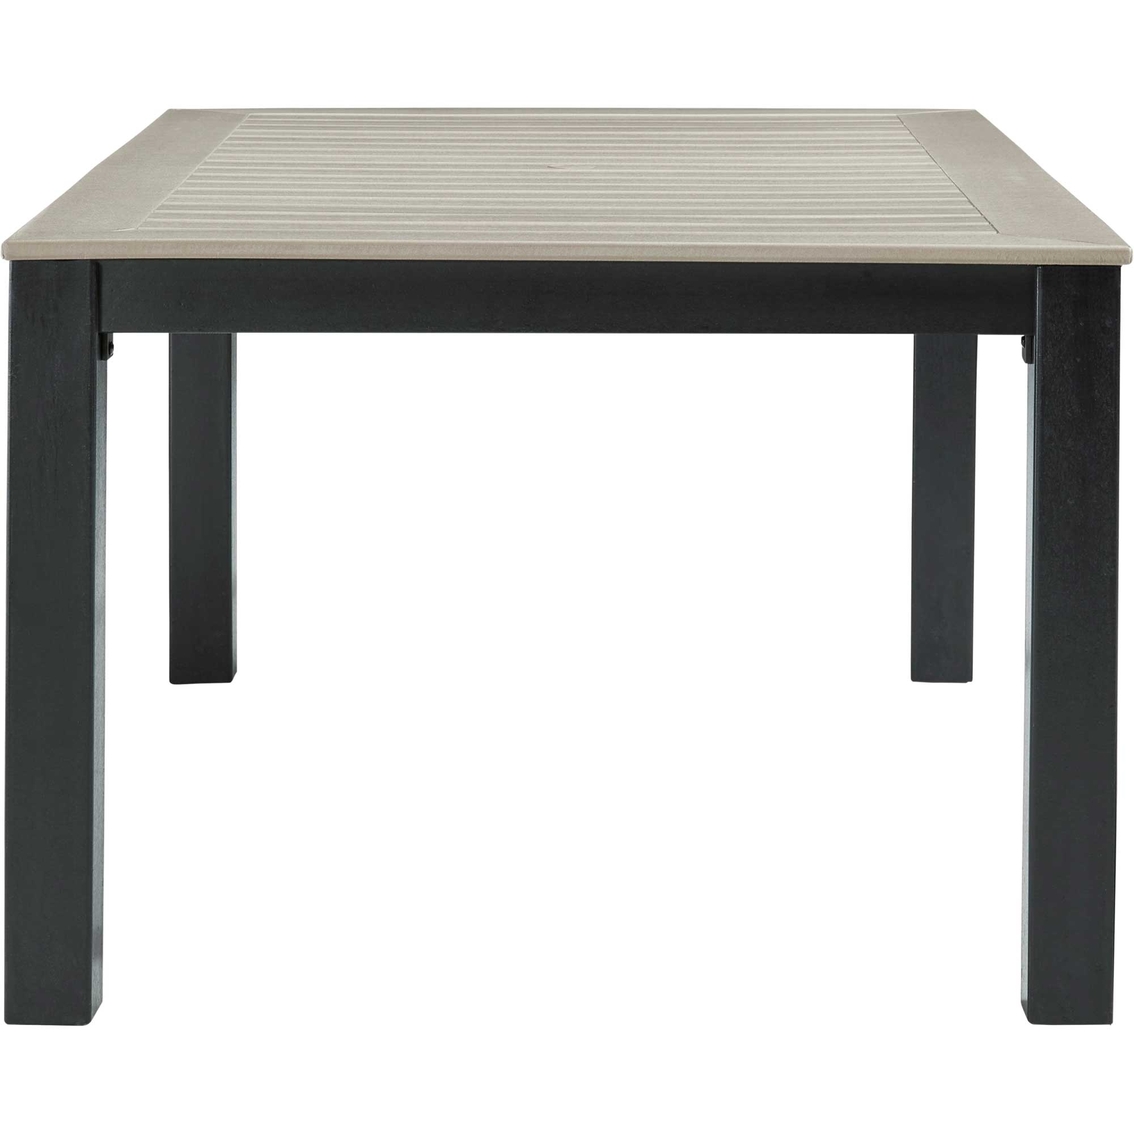 Signature Design by Ashley Mount Valley Outdoor Dining Table - Image 3 of 6